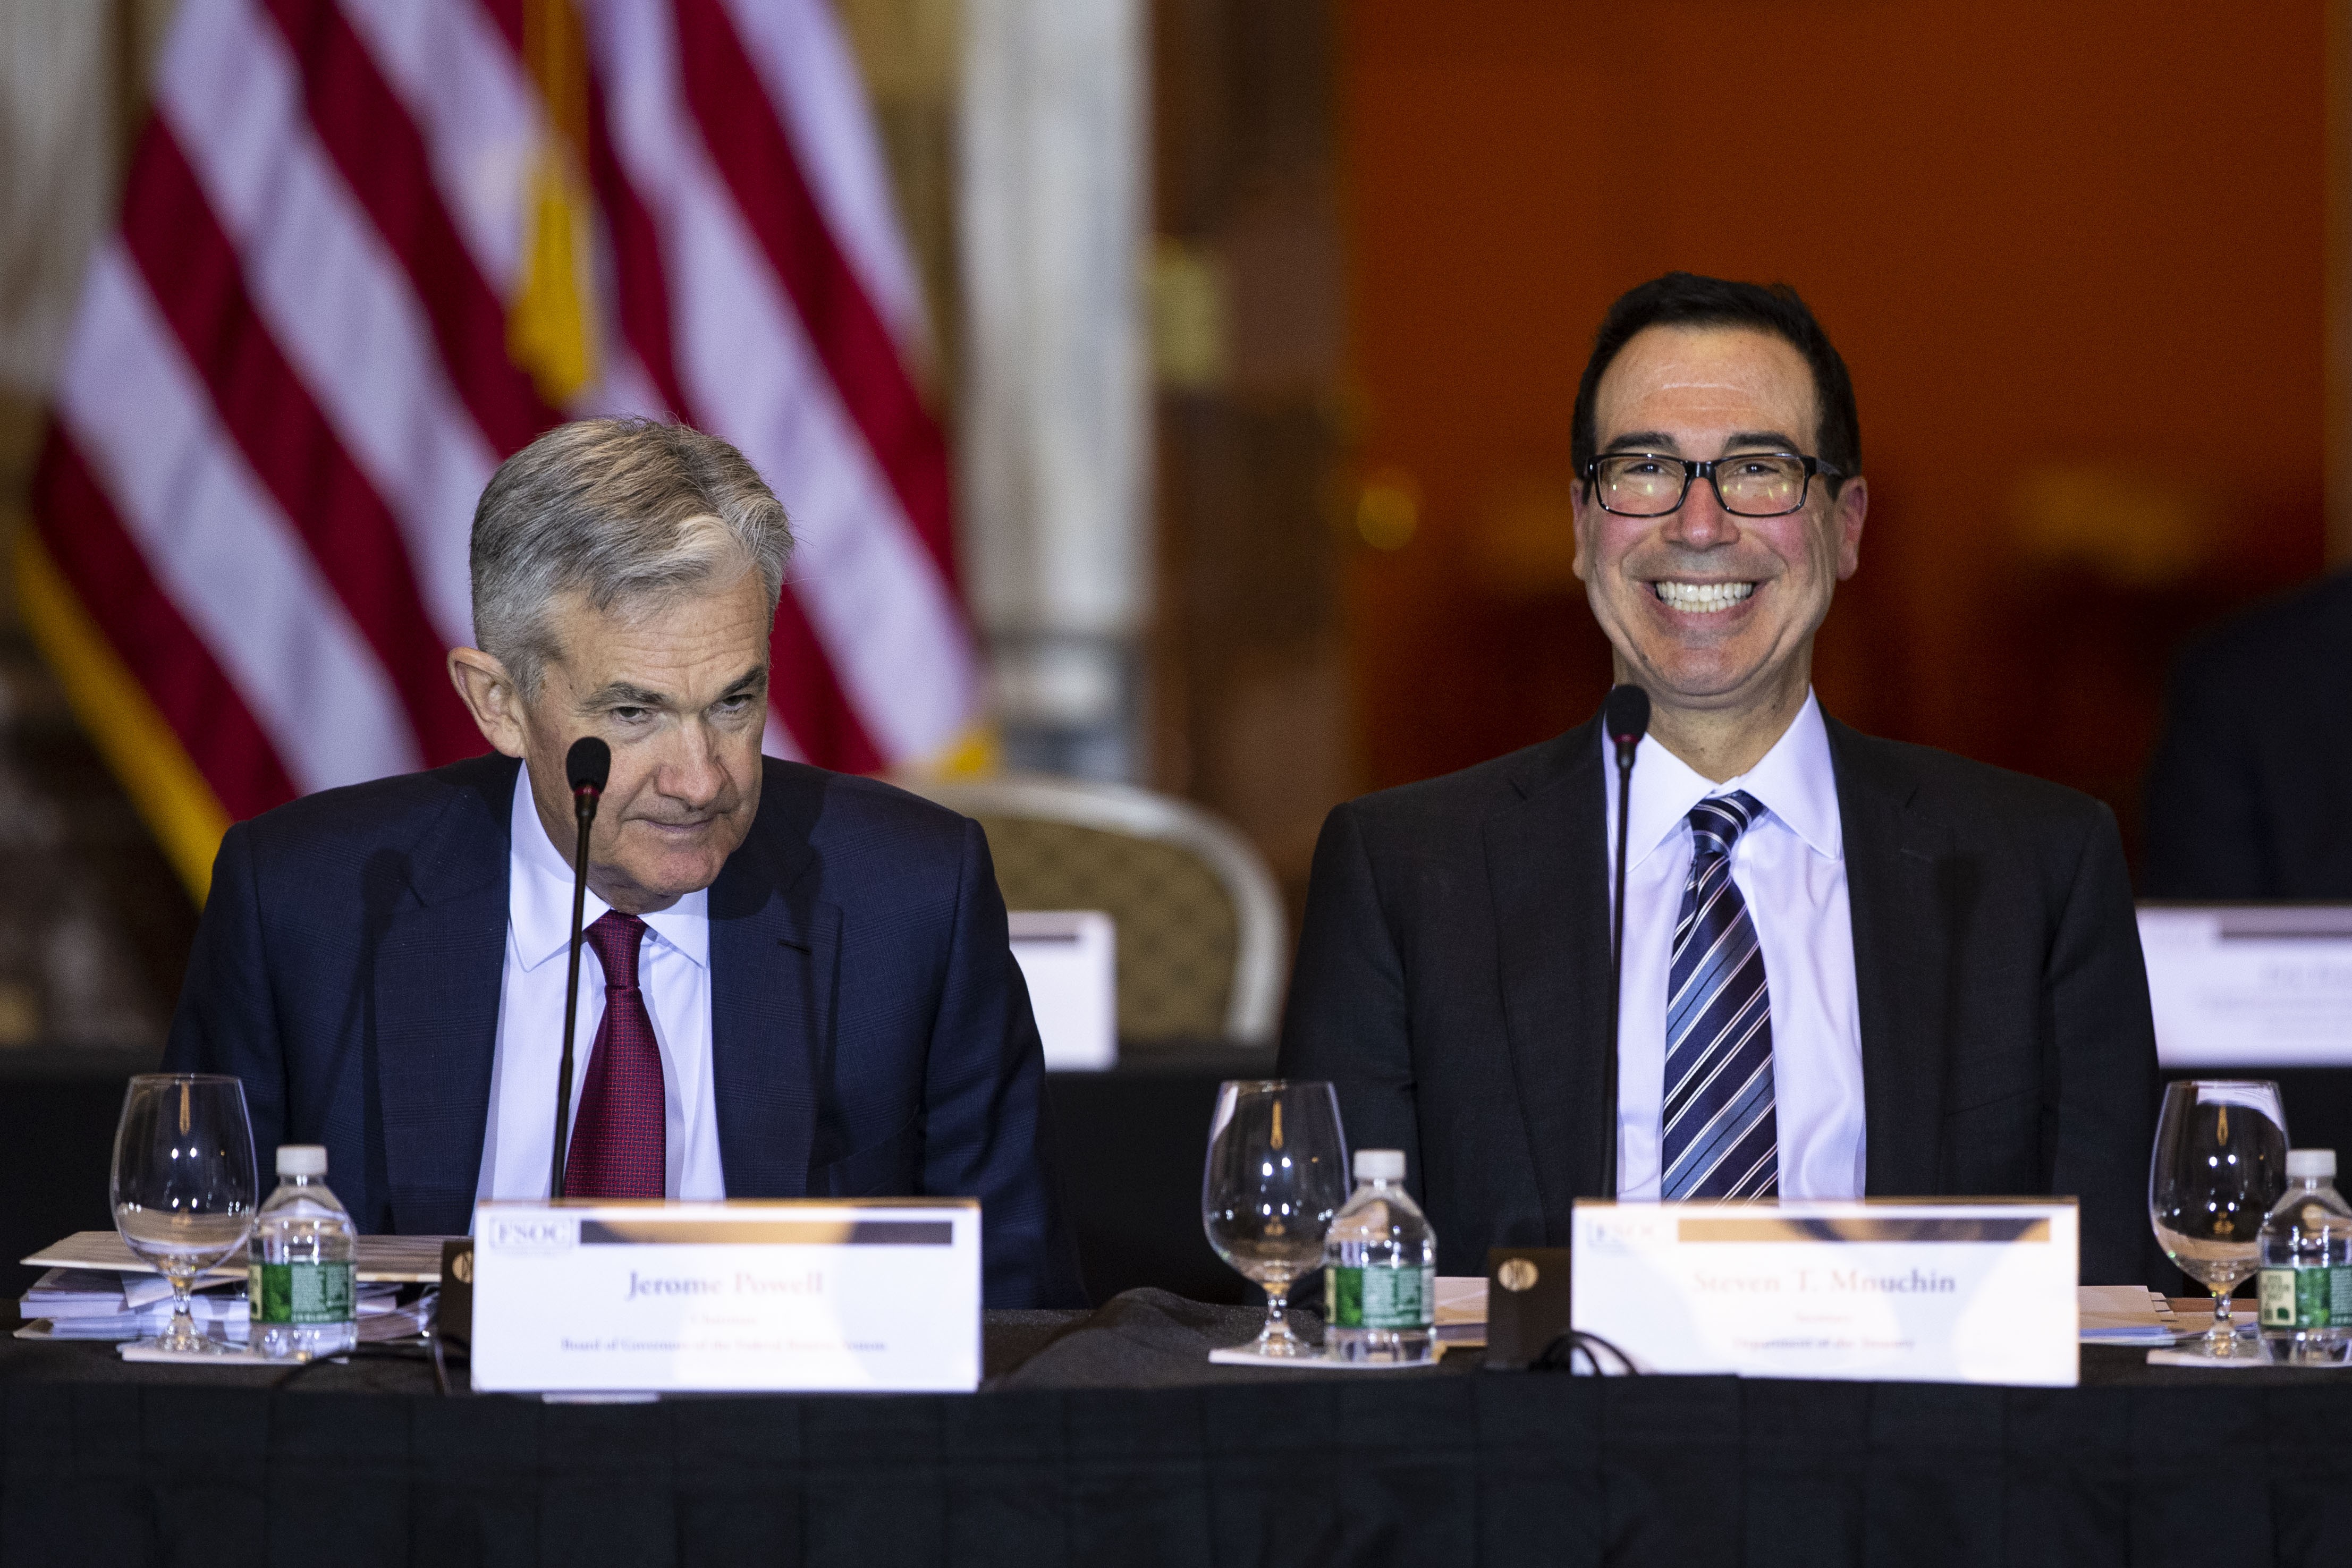 Jerome Powell, chairman of the US Federal Reserve, left, and Steven Mnuchin, US Treasury secretary, arrive for a Financial Stability Oversight Council meeting at the US Treasury in Washington on December 19, 2018. Photo: Bloomberg